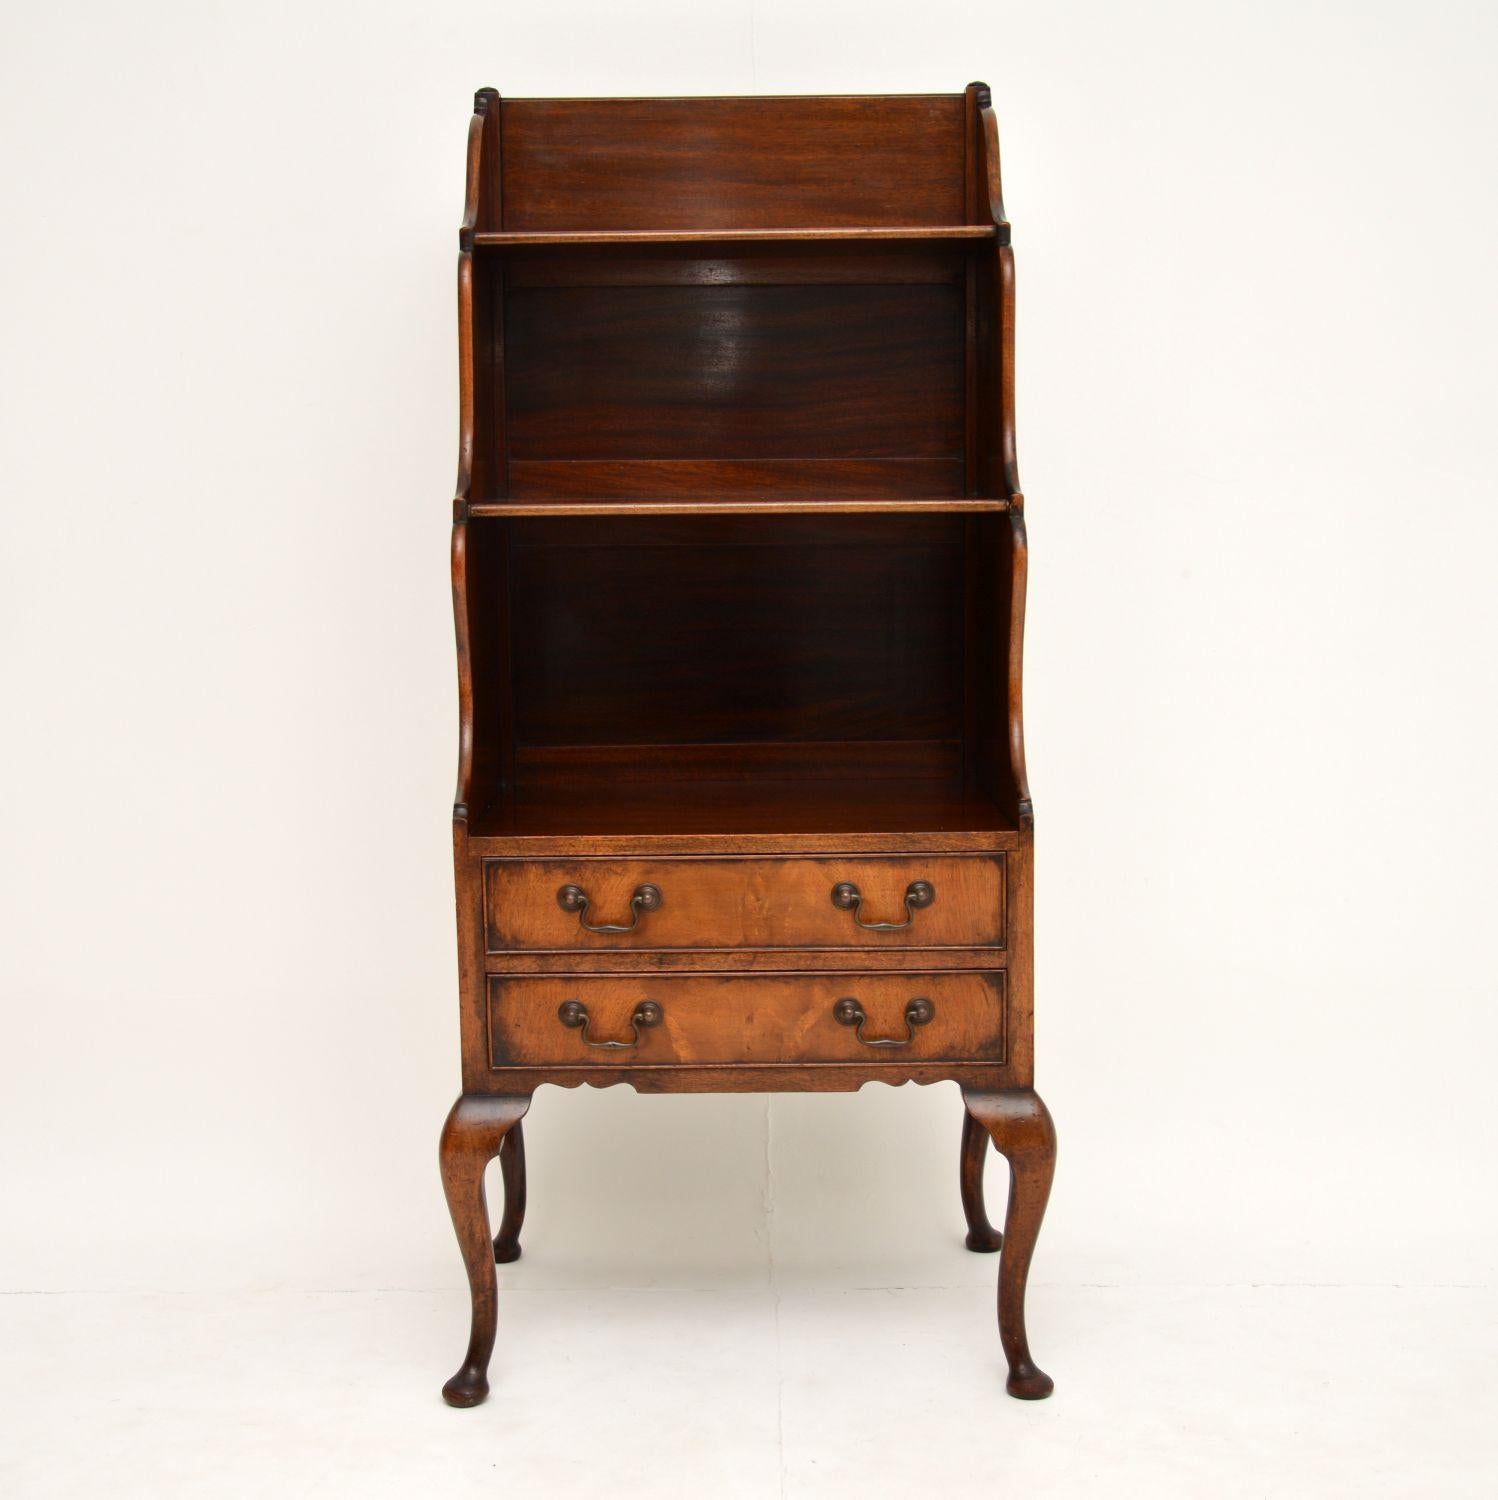 A top quality antique cascading waterfall bookcase in mahogany. This dates from circa 1890-1900 period.

This is very well made, full of character and is of a great size. The drawers are solid oak lined with extremely fine dovetails, this has